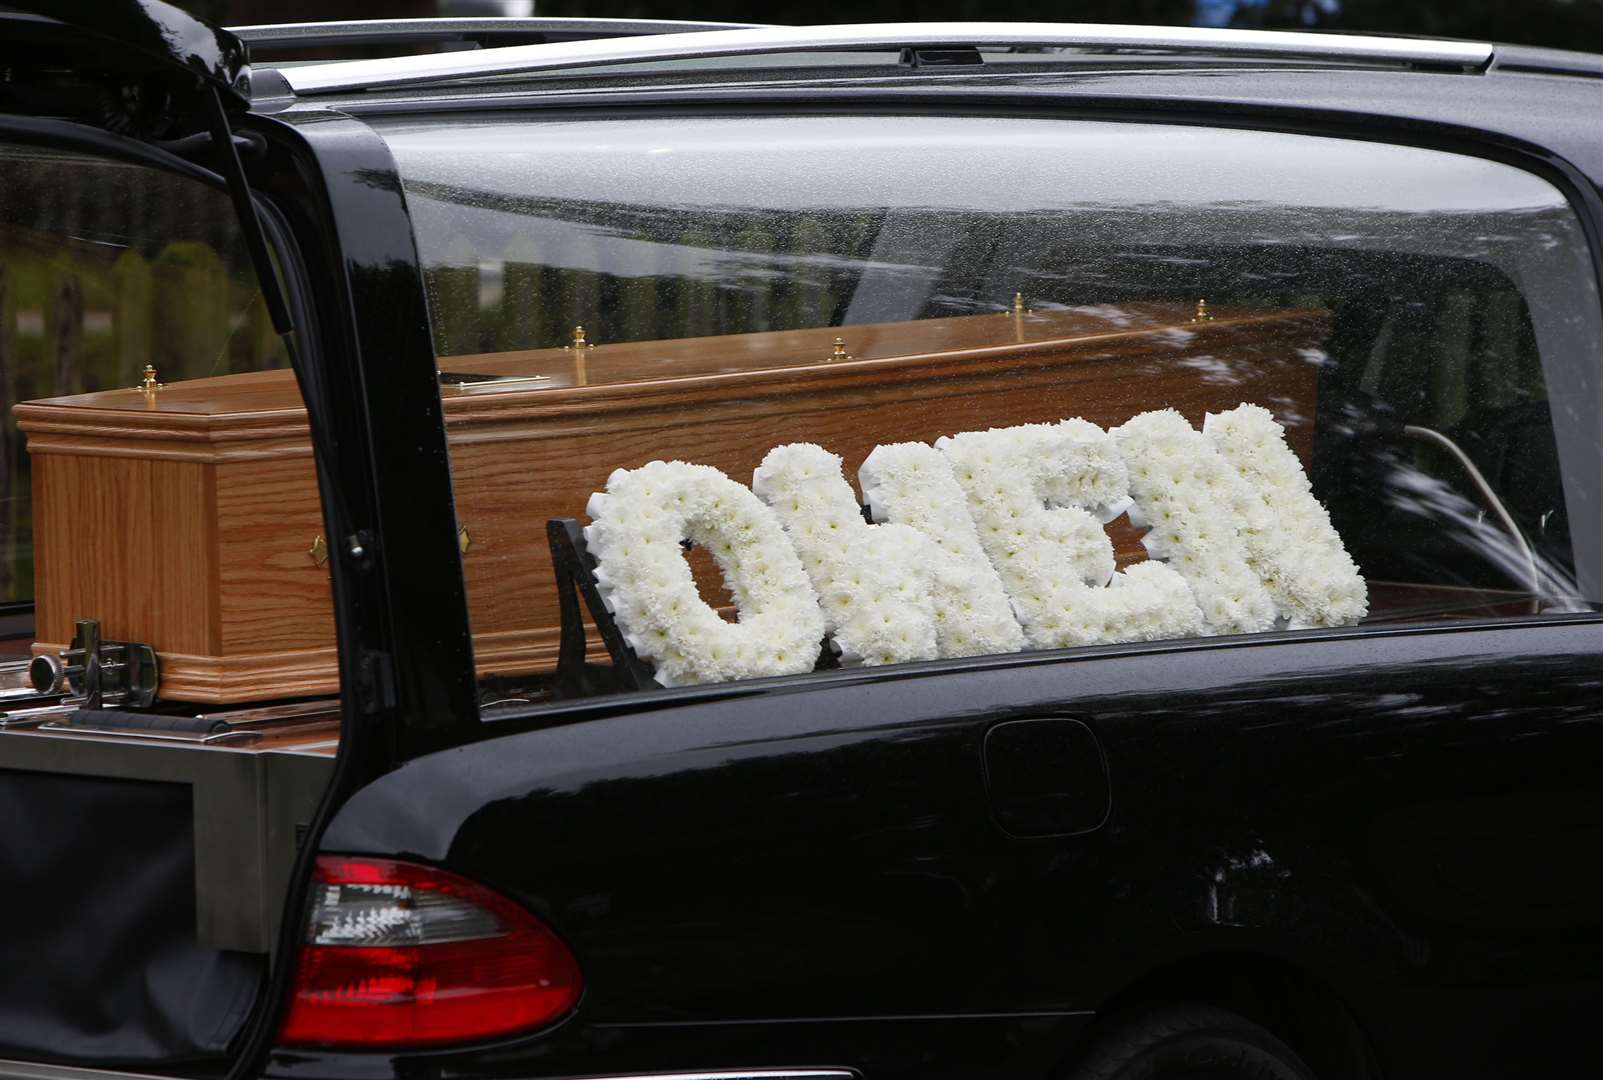 Hundreds attended the fhe funeral of 15-year-old Owen Kinghorn